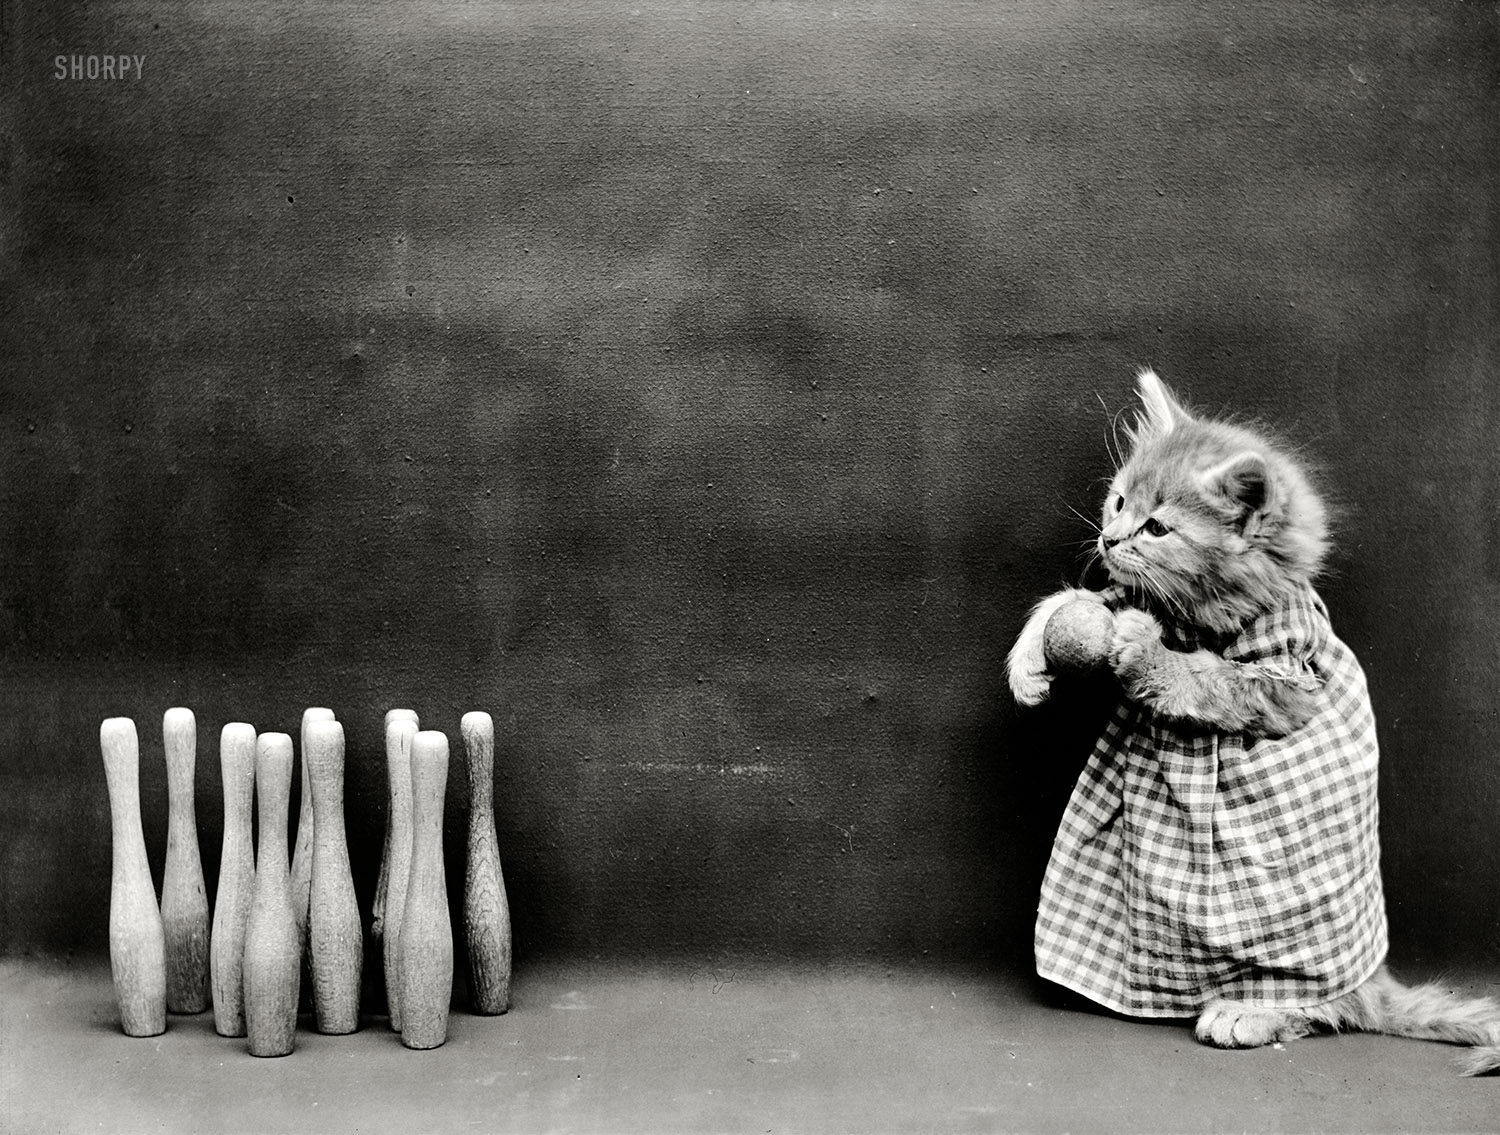 1914. "Kitten in costume with bowling ball and pins." If memory serves, an omen of the impending Apocalypse. Photo by Harry W. Frees. View full size.